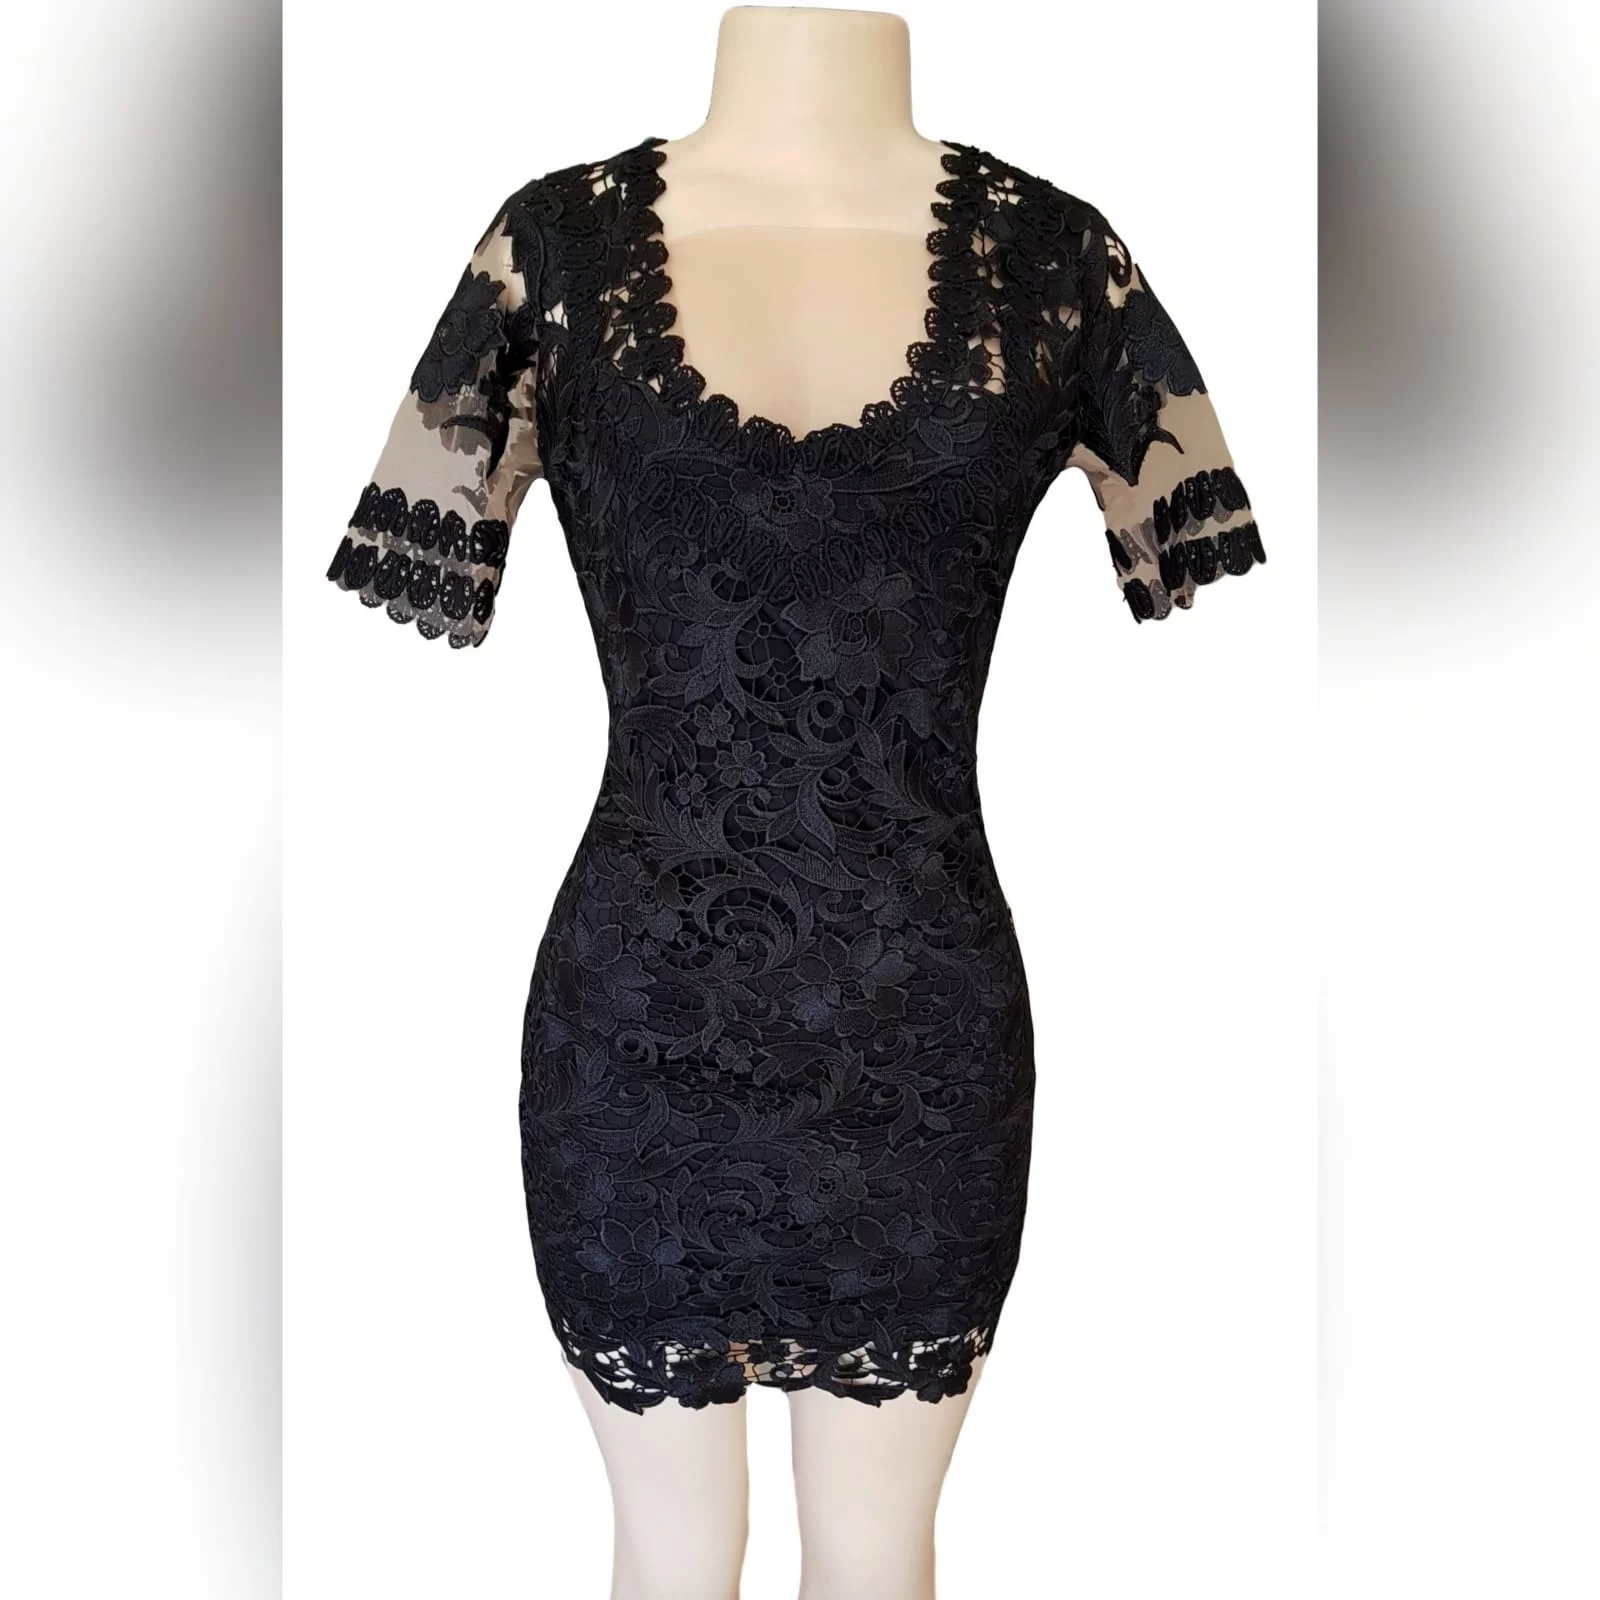 Black short guipure lace evening dress 1 black short guipure lace evening dress with a rounded front and back neckline. With sheers short sleeves detailed with lace.